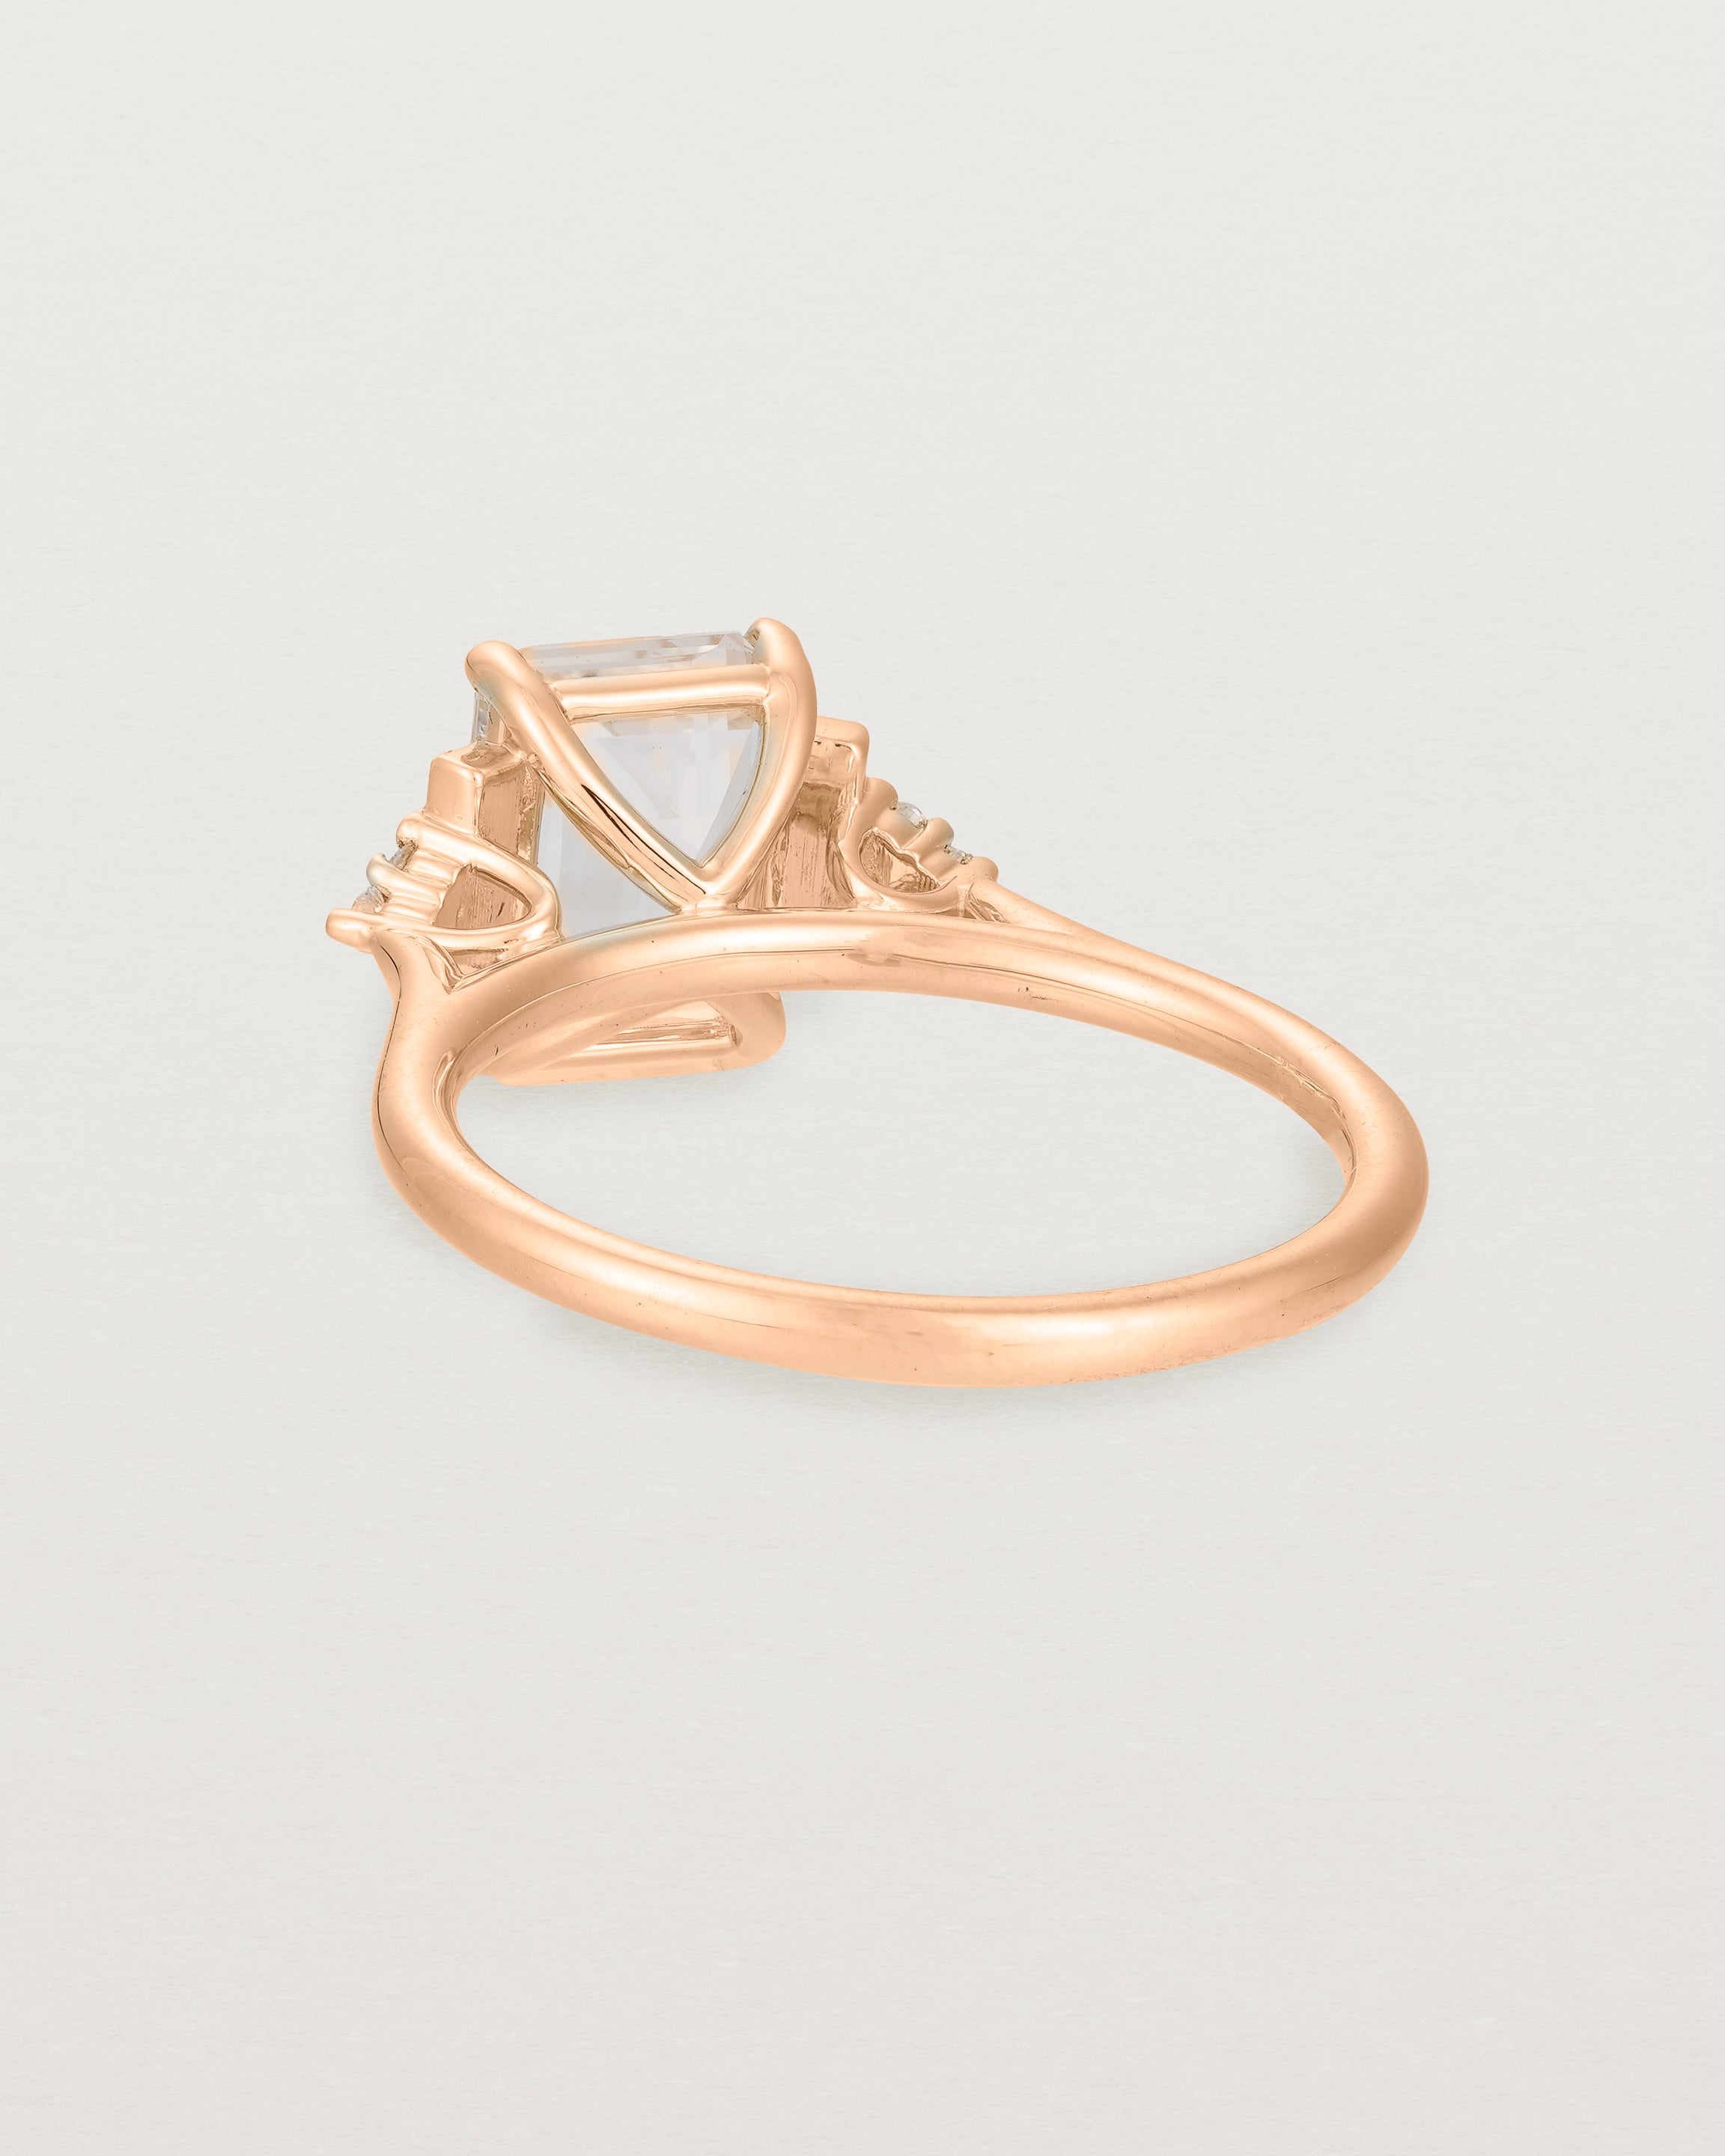 Back view of the Elodie Ring featuring a pale pink emerald cut morganite in rose gold